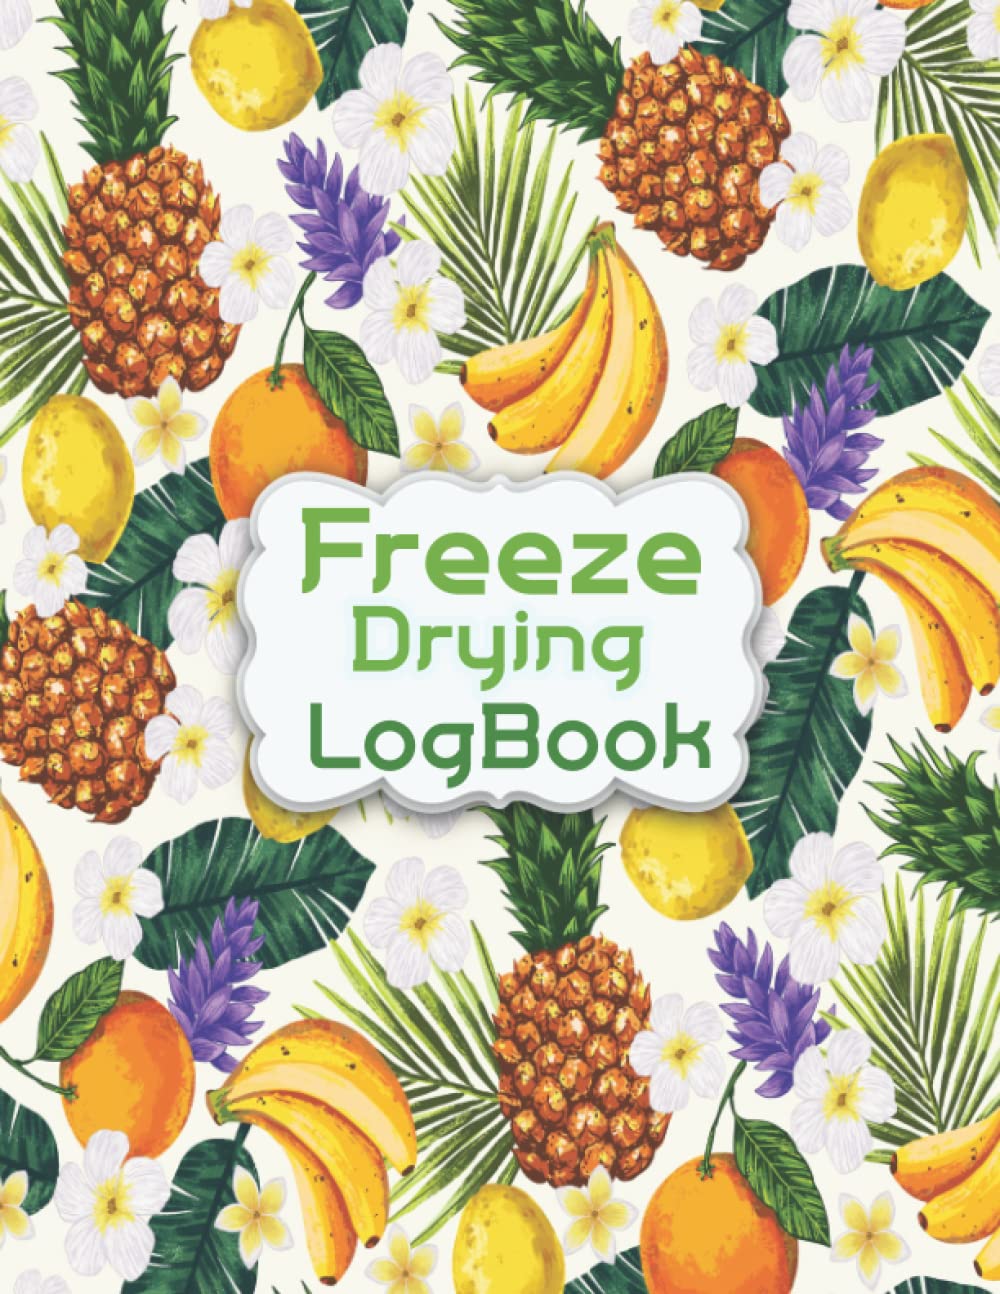 Freeze Drying LogBook: Freeze Dryer Log / Form to EASILY organize and track your freeze drying batches!